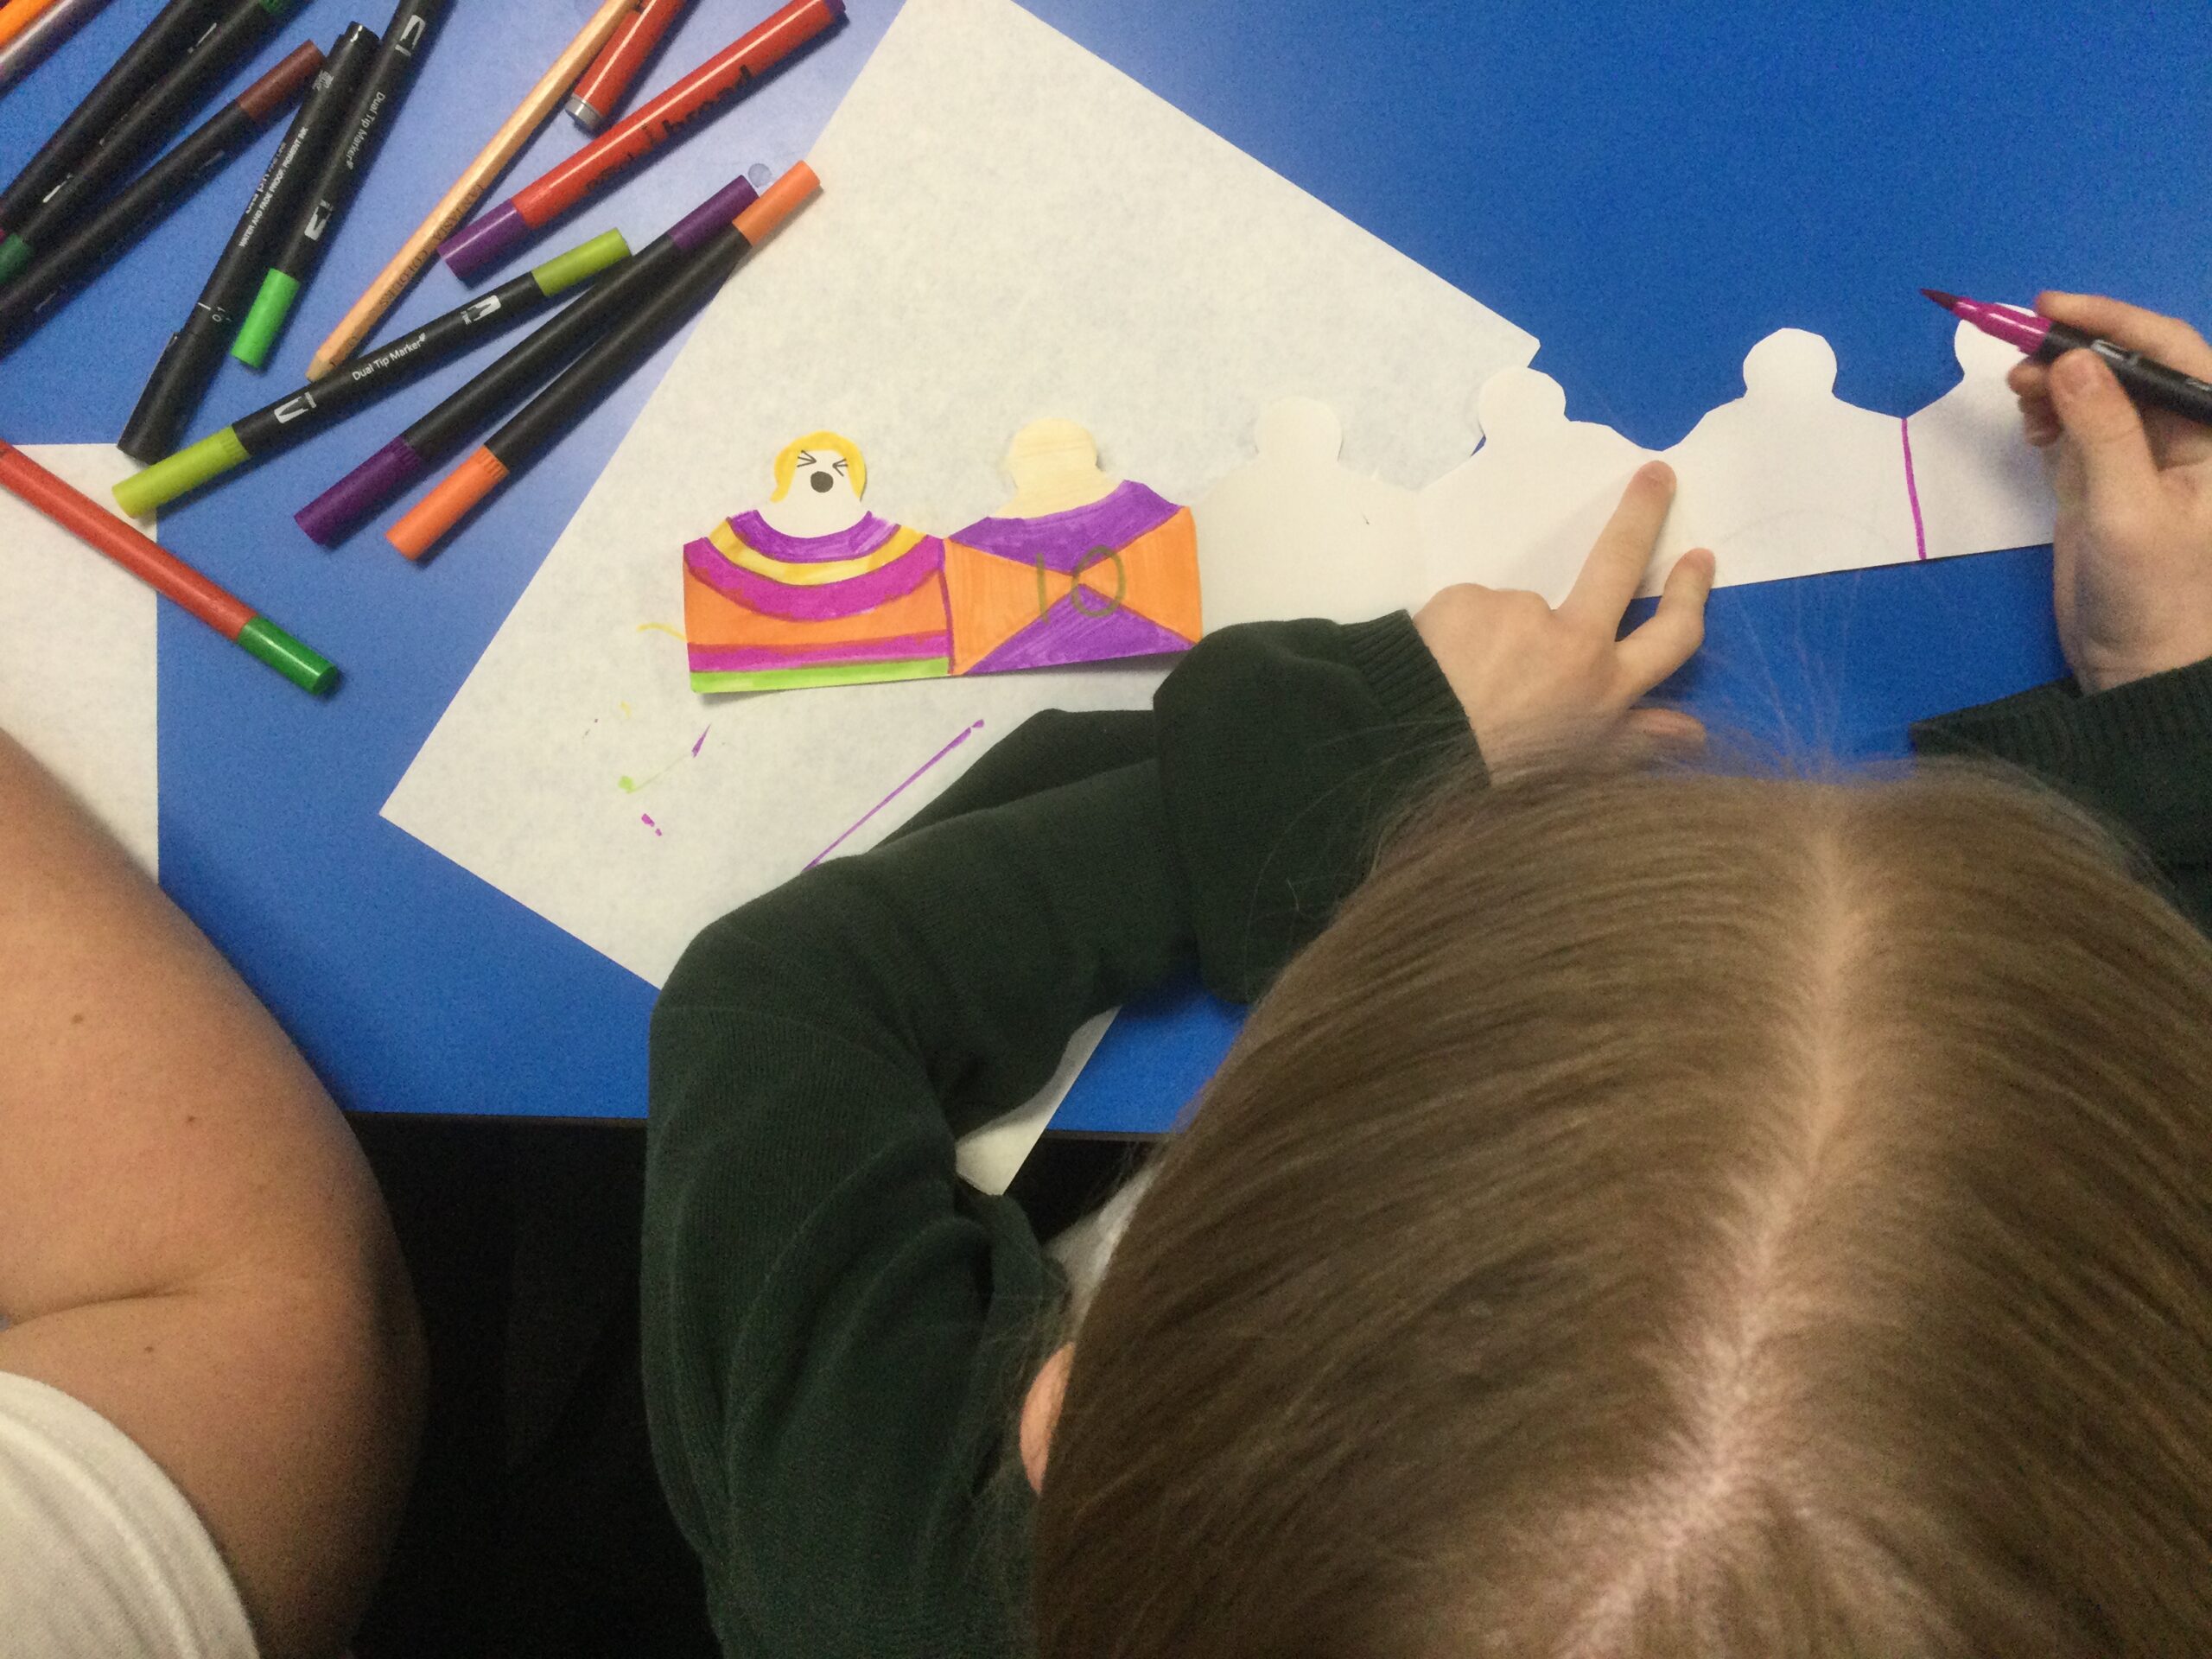 Overhead of child drawing paper people and colouring them in orange and purple